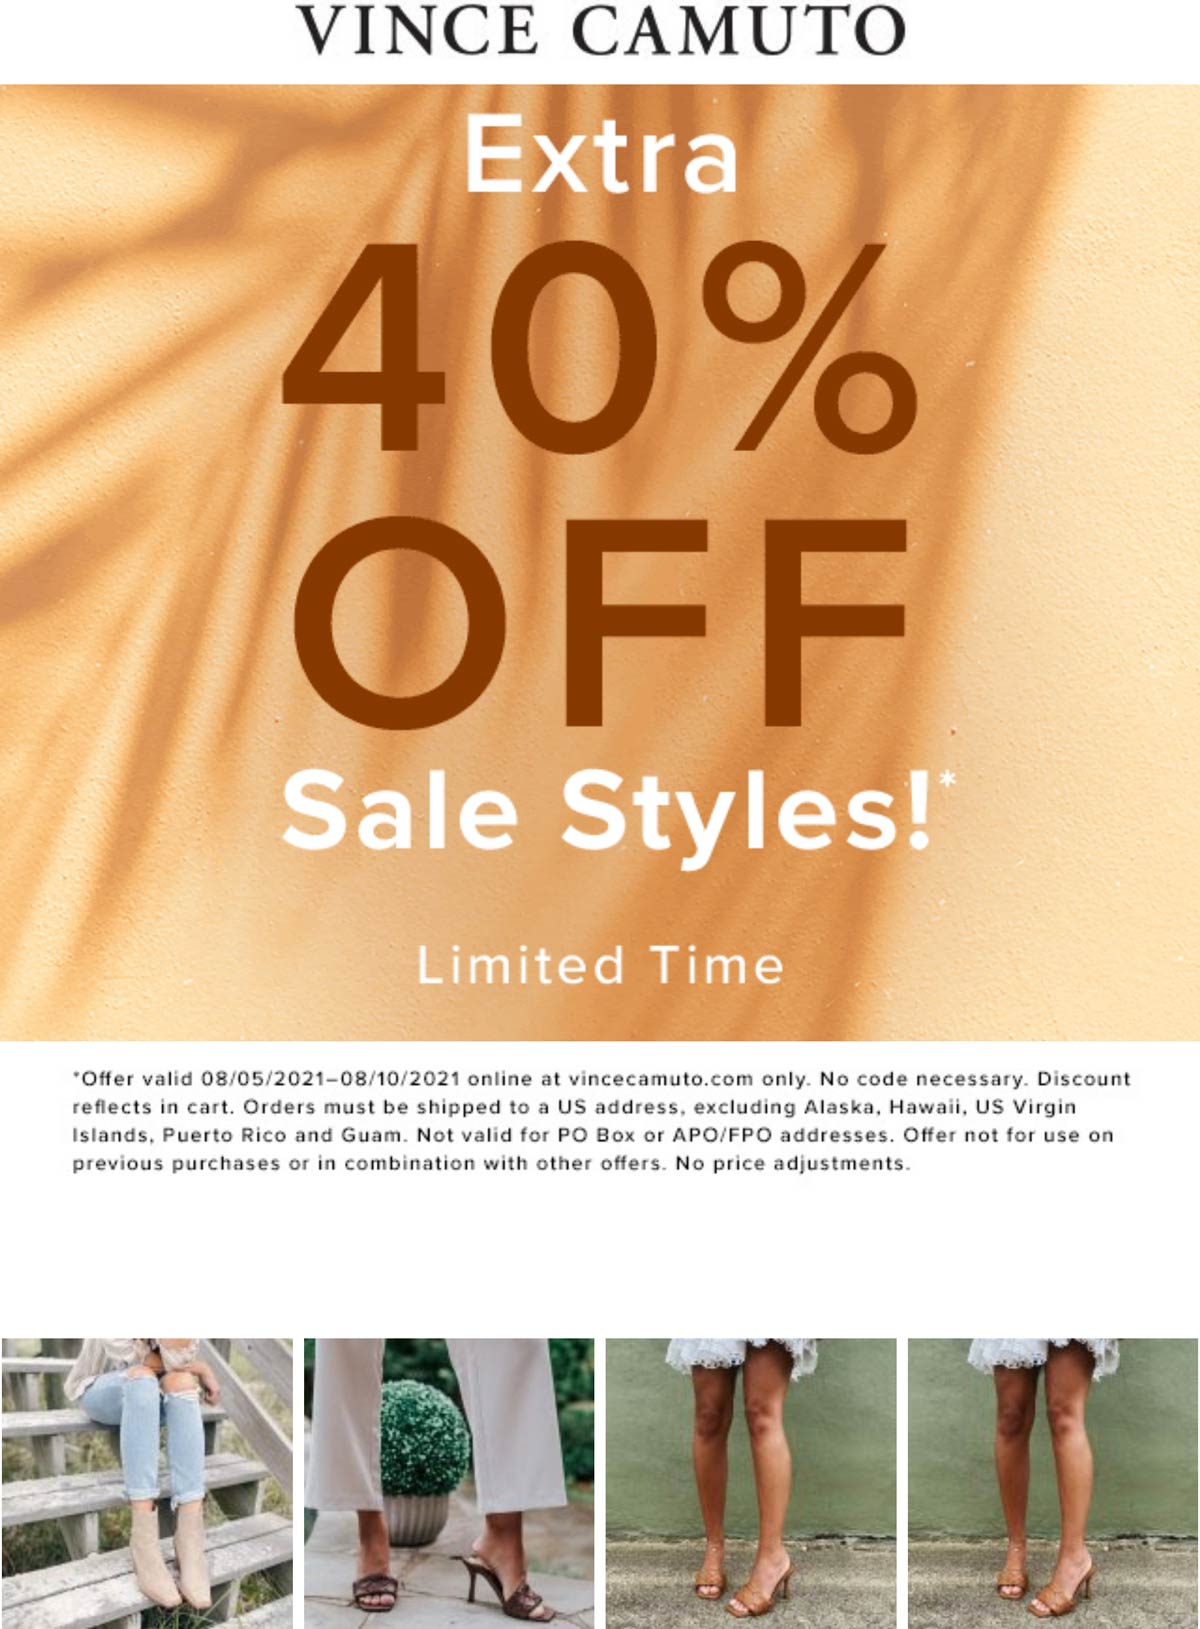 Baan accessoires gemeenschap January, 2022] Extra 40% off sale styles online at Vince Camuto  #vincecamuto coupon & promo code | The Coupons App®